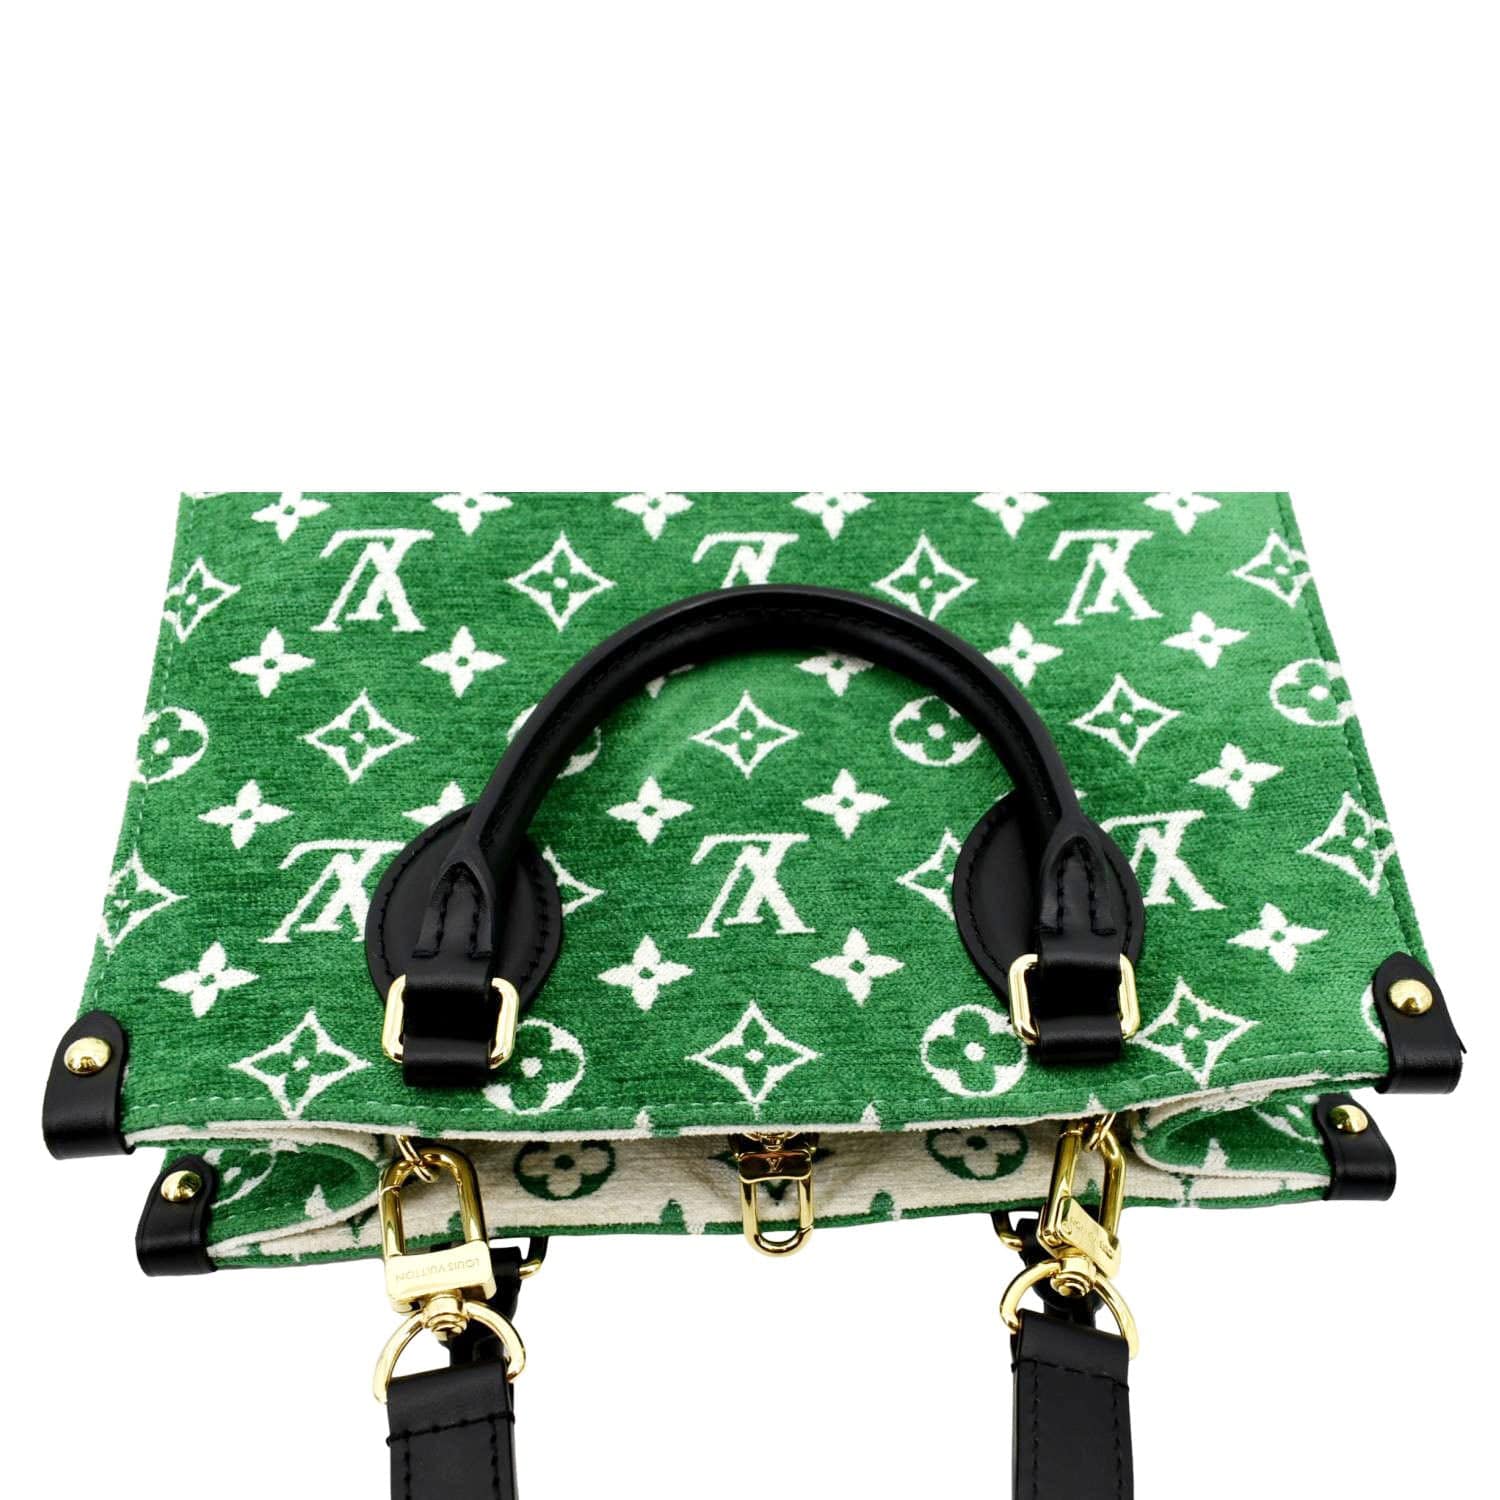 Louis Vuitton green LV Match OnTheGo PM Tote Bag